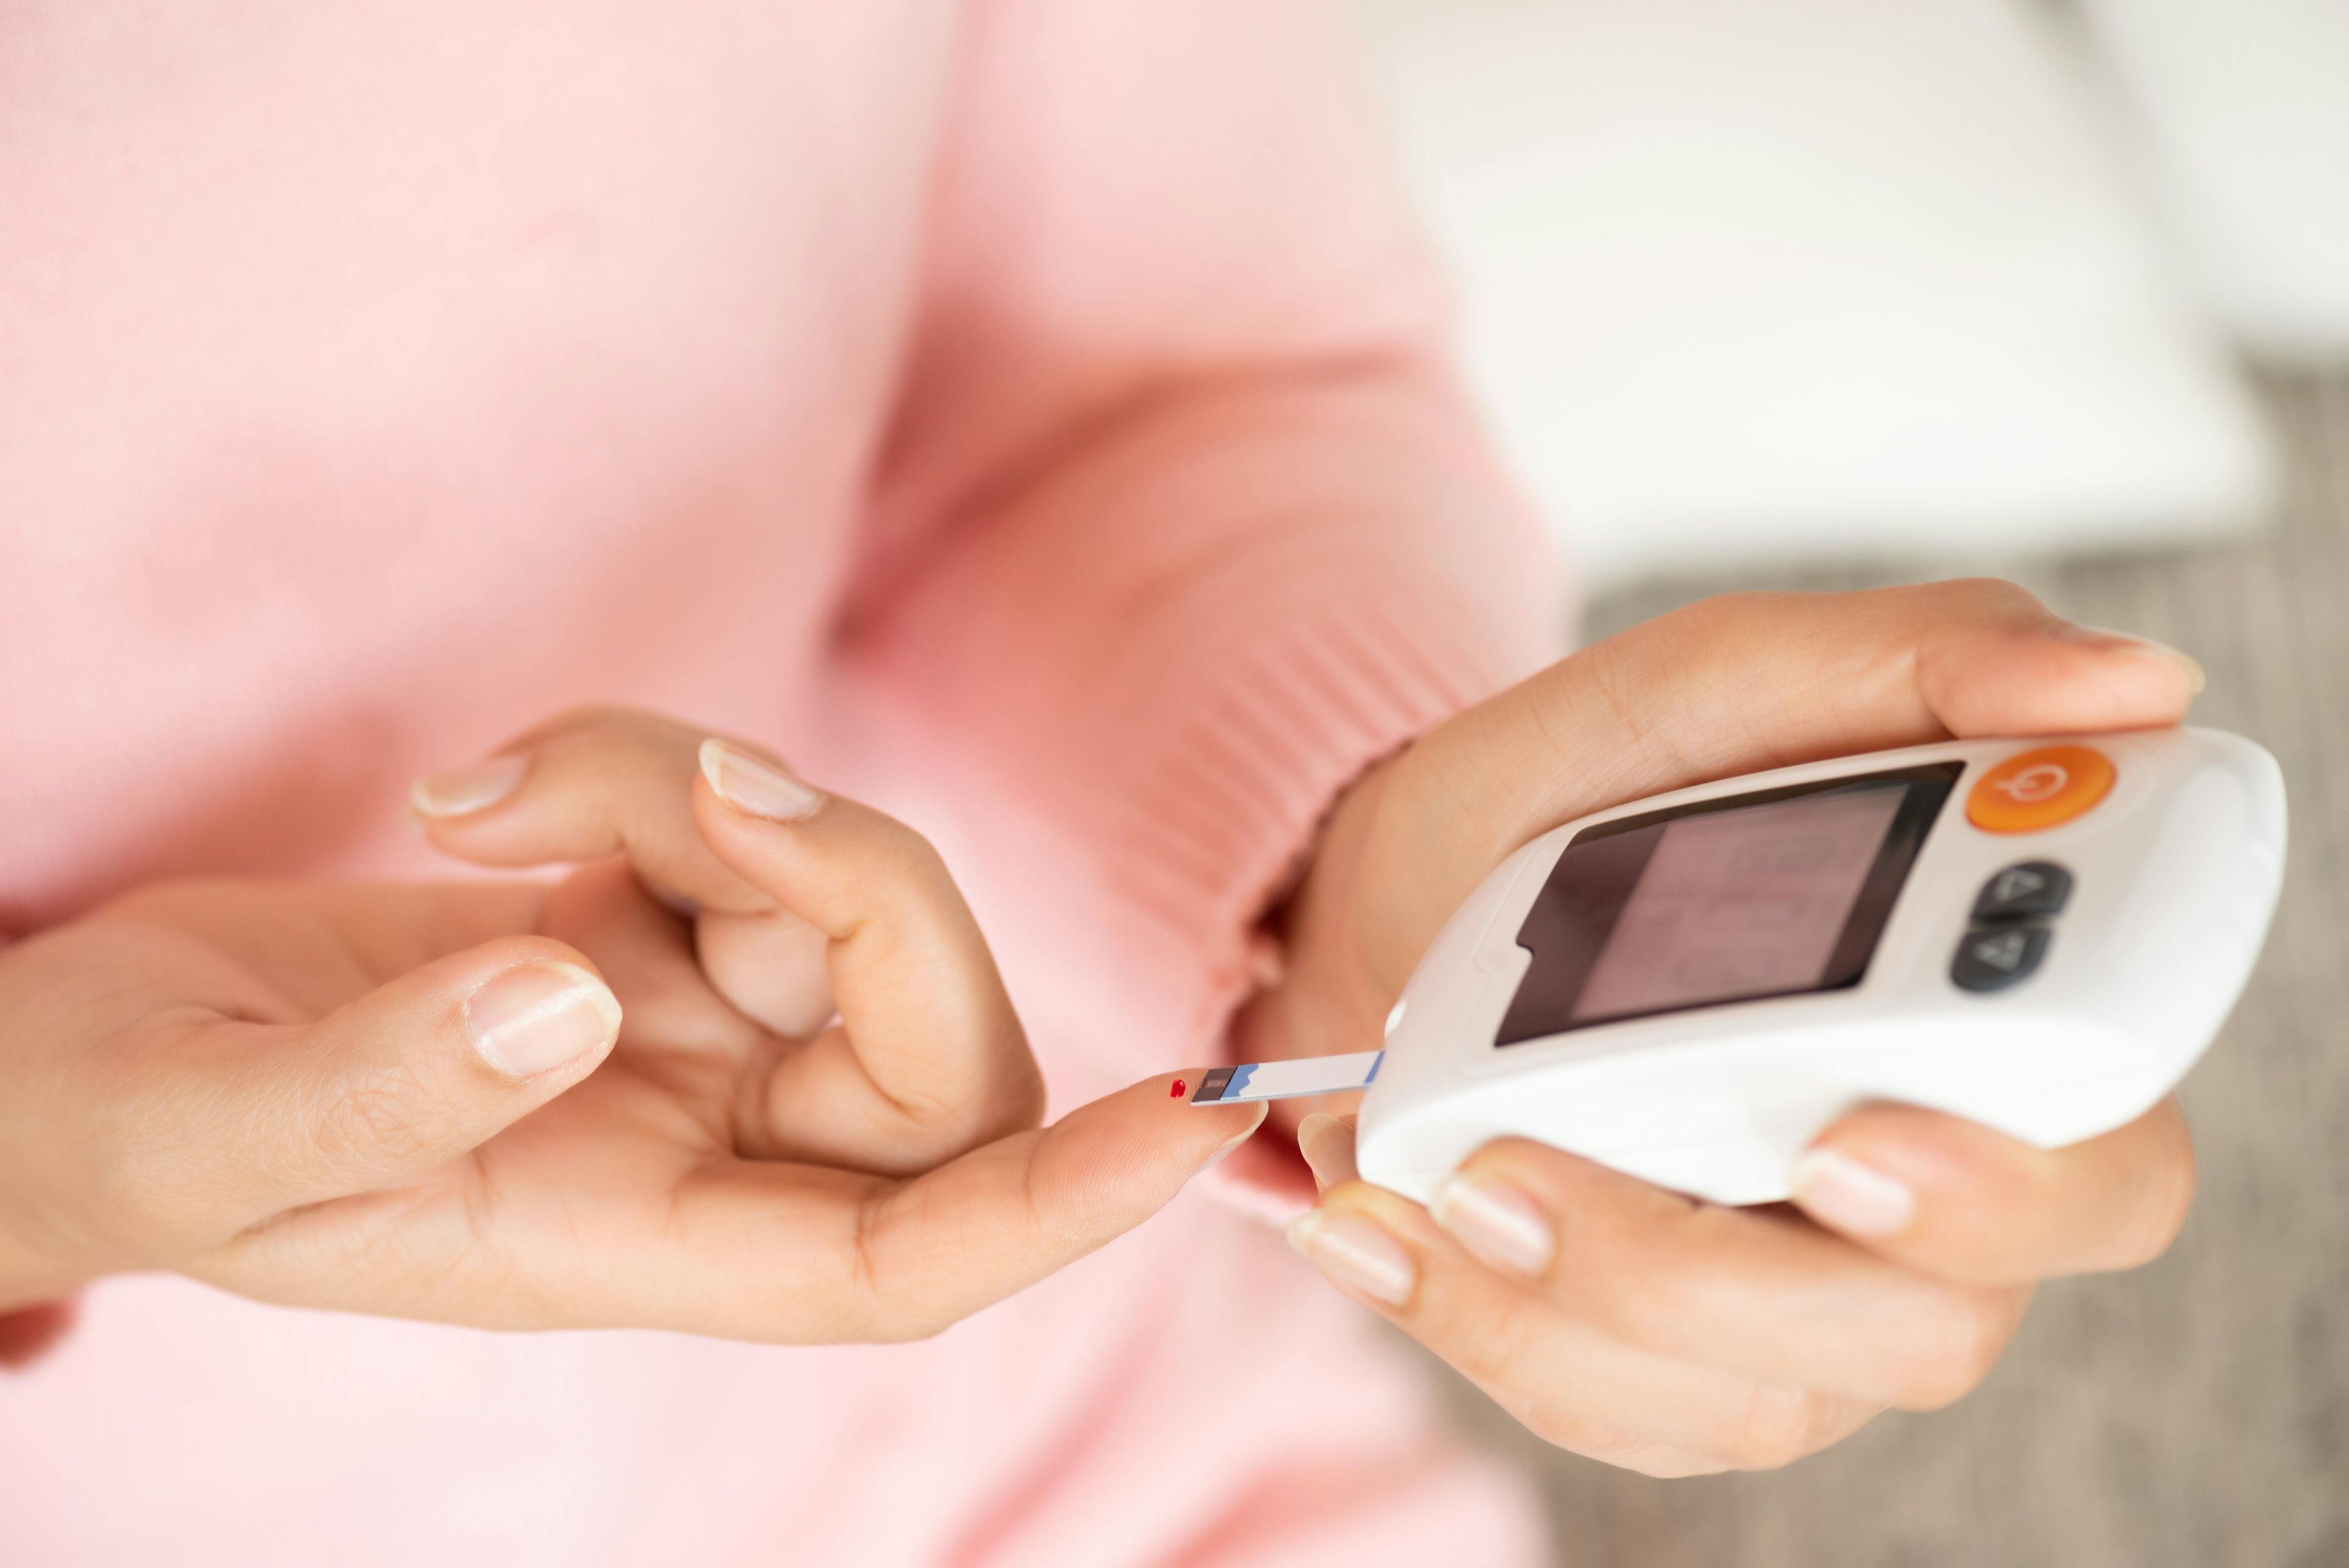 Despite improved risk profiles, women with type 1 diabetes face increased CVD risk